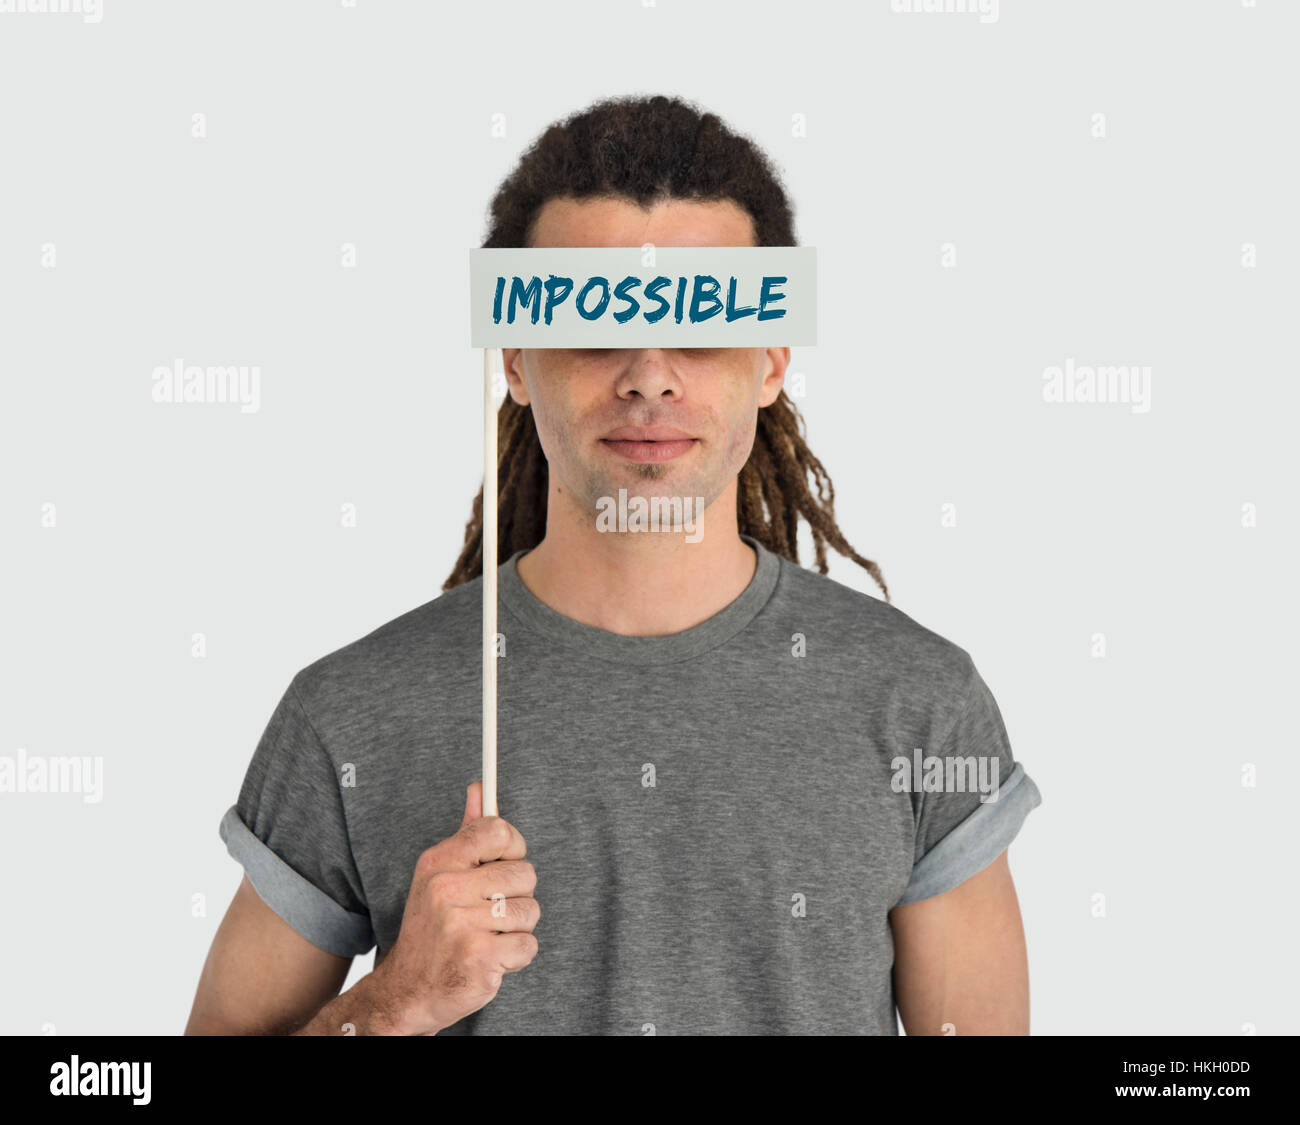 Impossible No Way Pessimism Word Concept Stock Photo